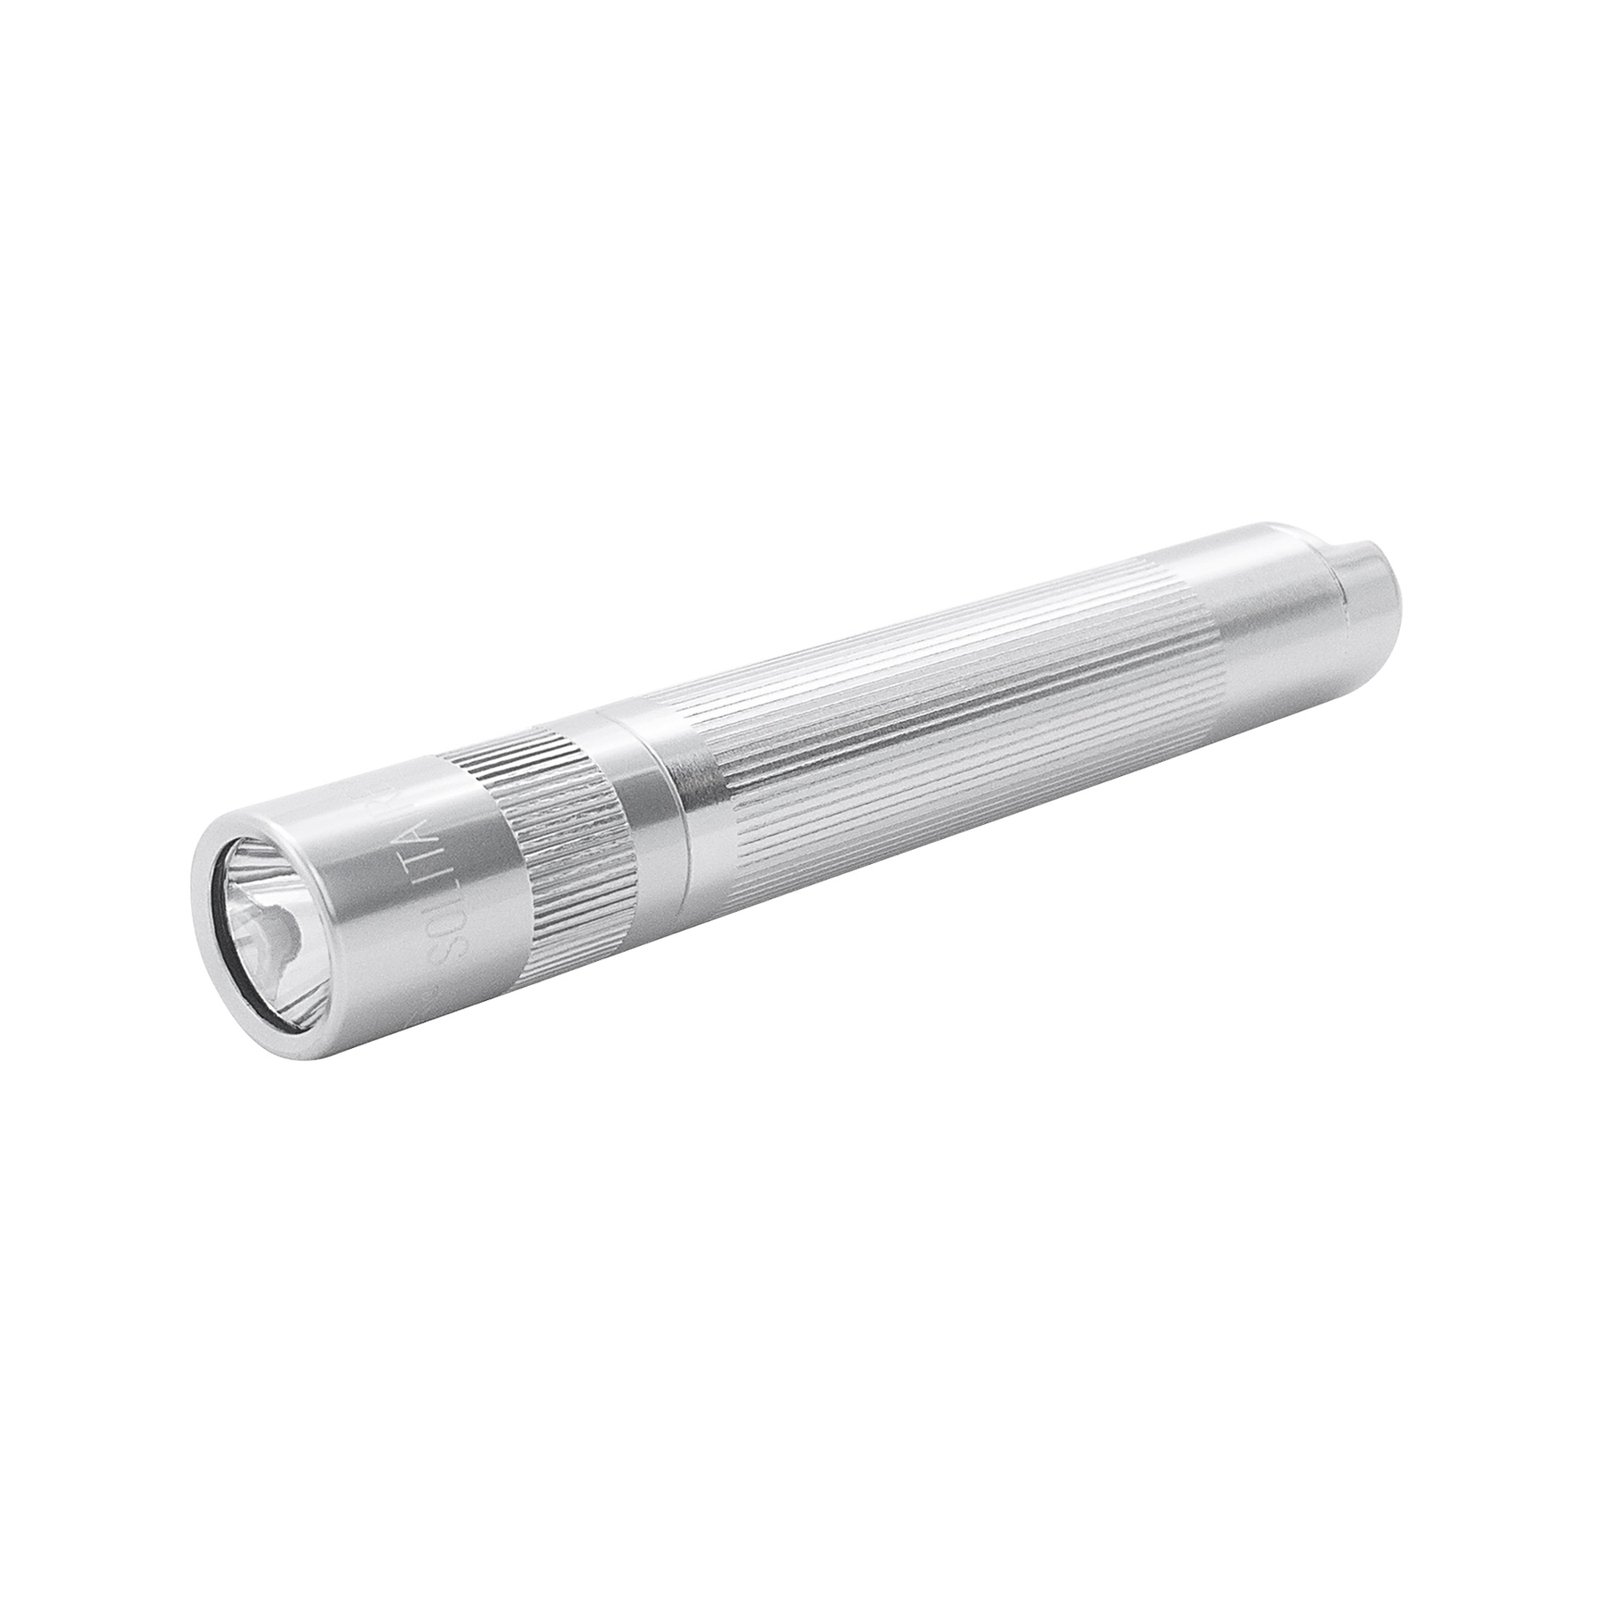 Maglite Xenon-lommelygte Solitaire 1-cellet AAA, sølv